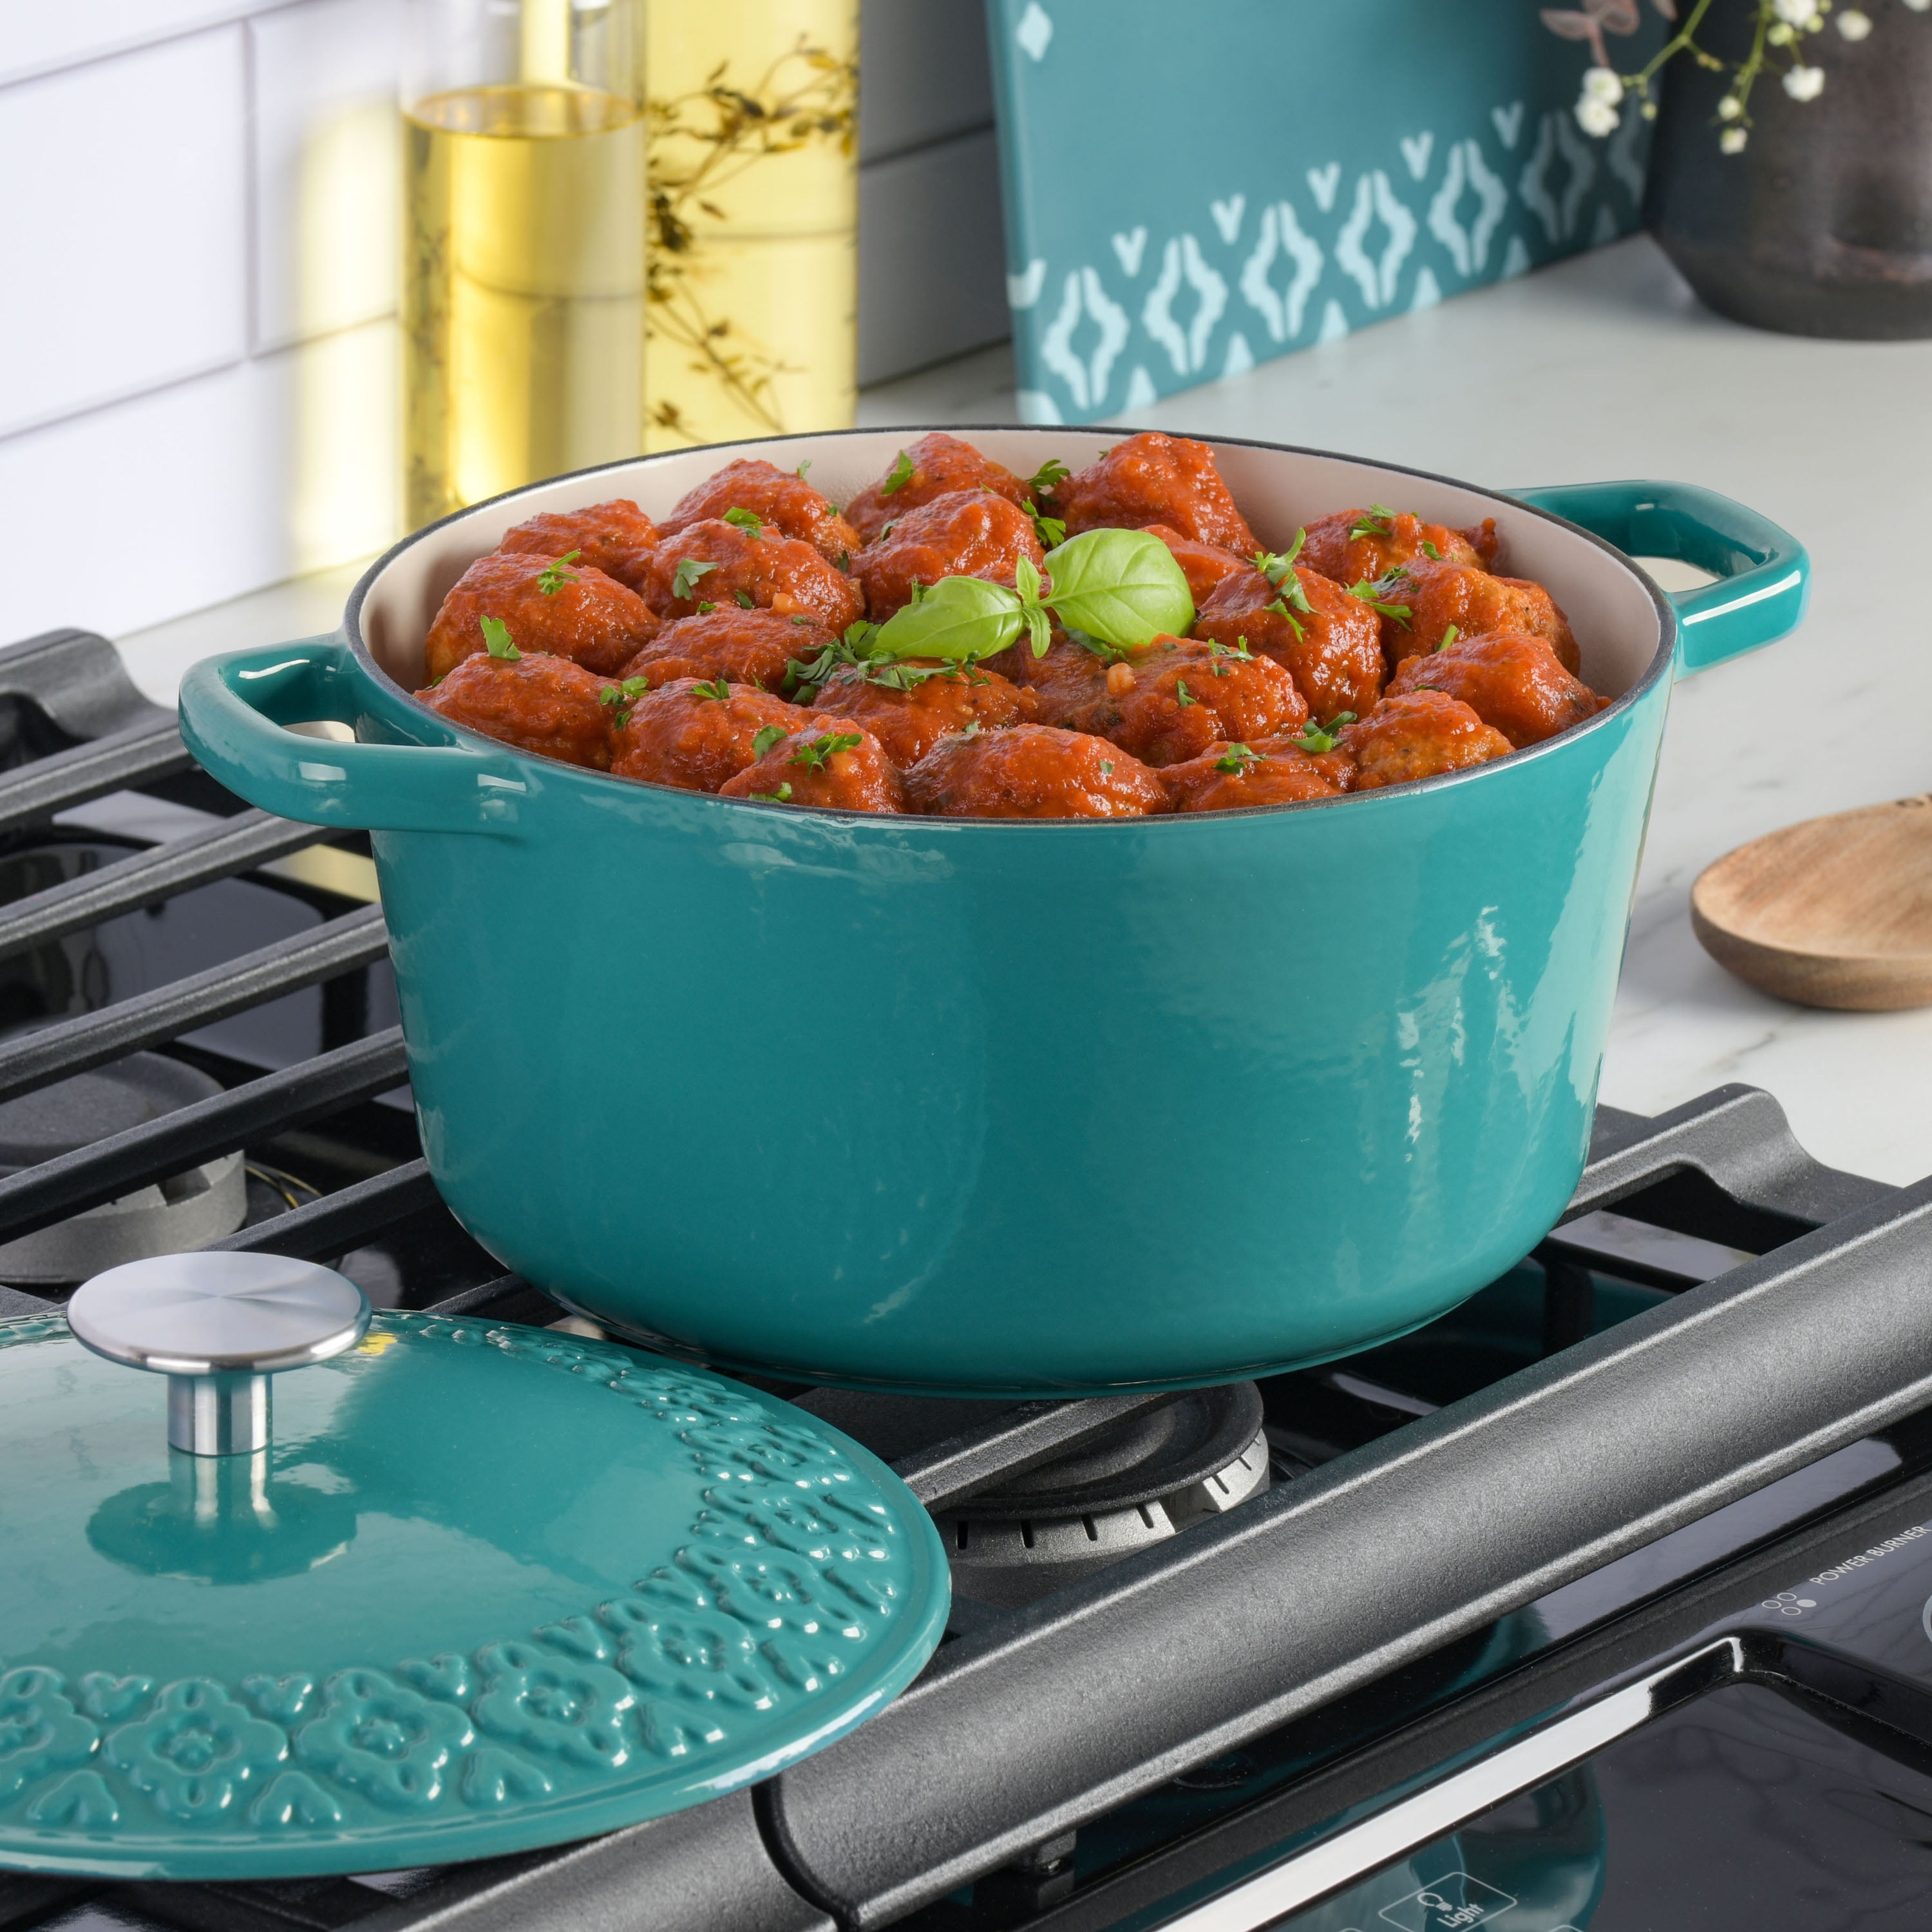 Spice BY TIA MOWRY Savory Saffron 6 qt. Enameled Cast Iron Dutch Oven with  Lid in Charcoal 985118381M - The Home Depot